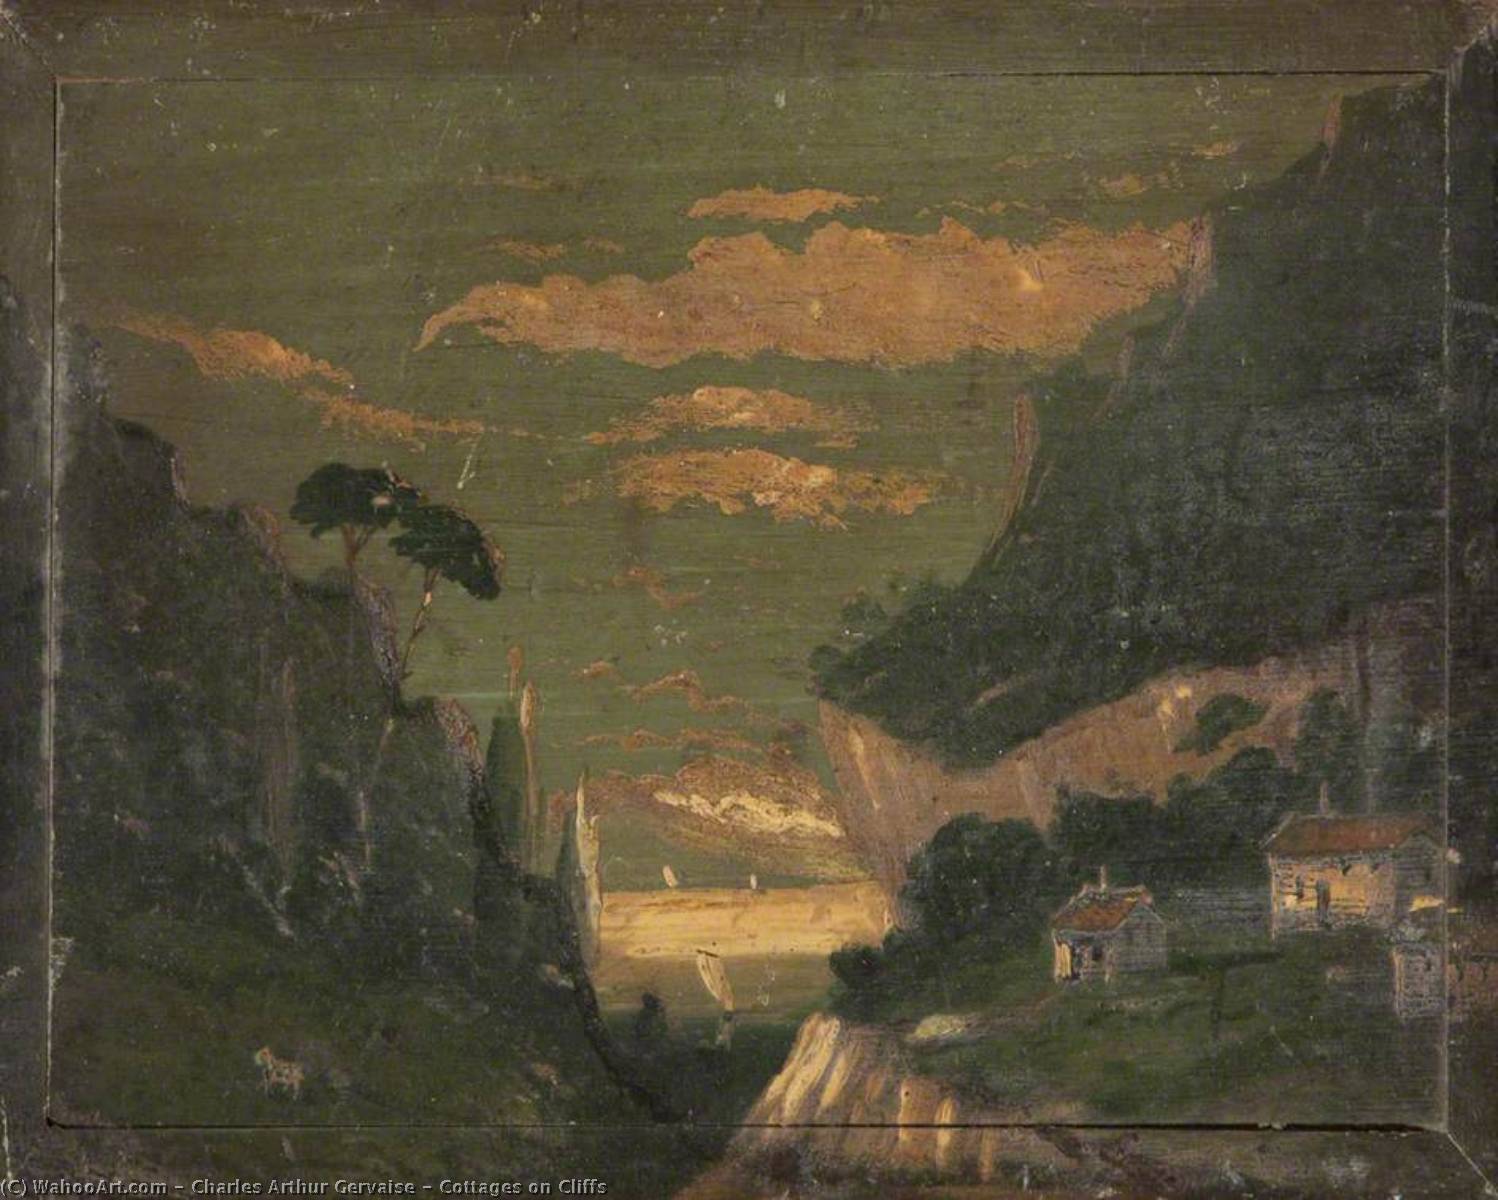 Cottages on Cliffs, 1874 by Charles Arthur Gervaise Charles Arthur Gervaise | ArtsDot.com